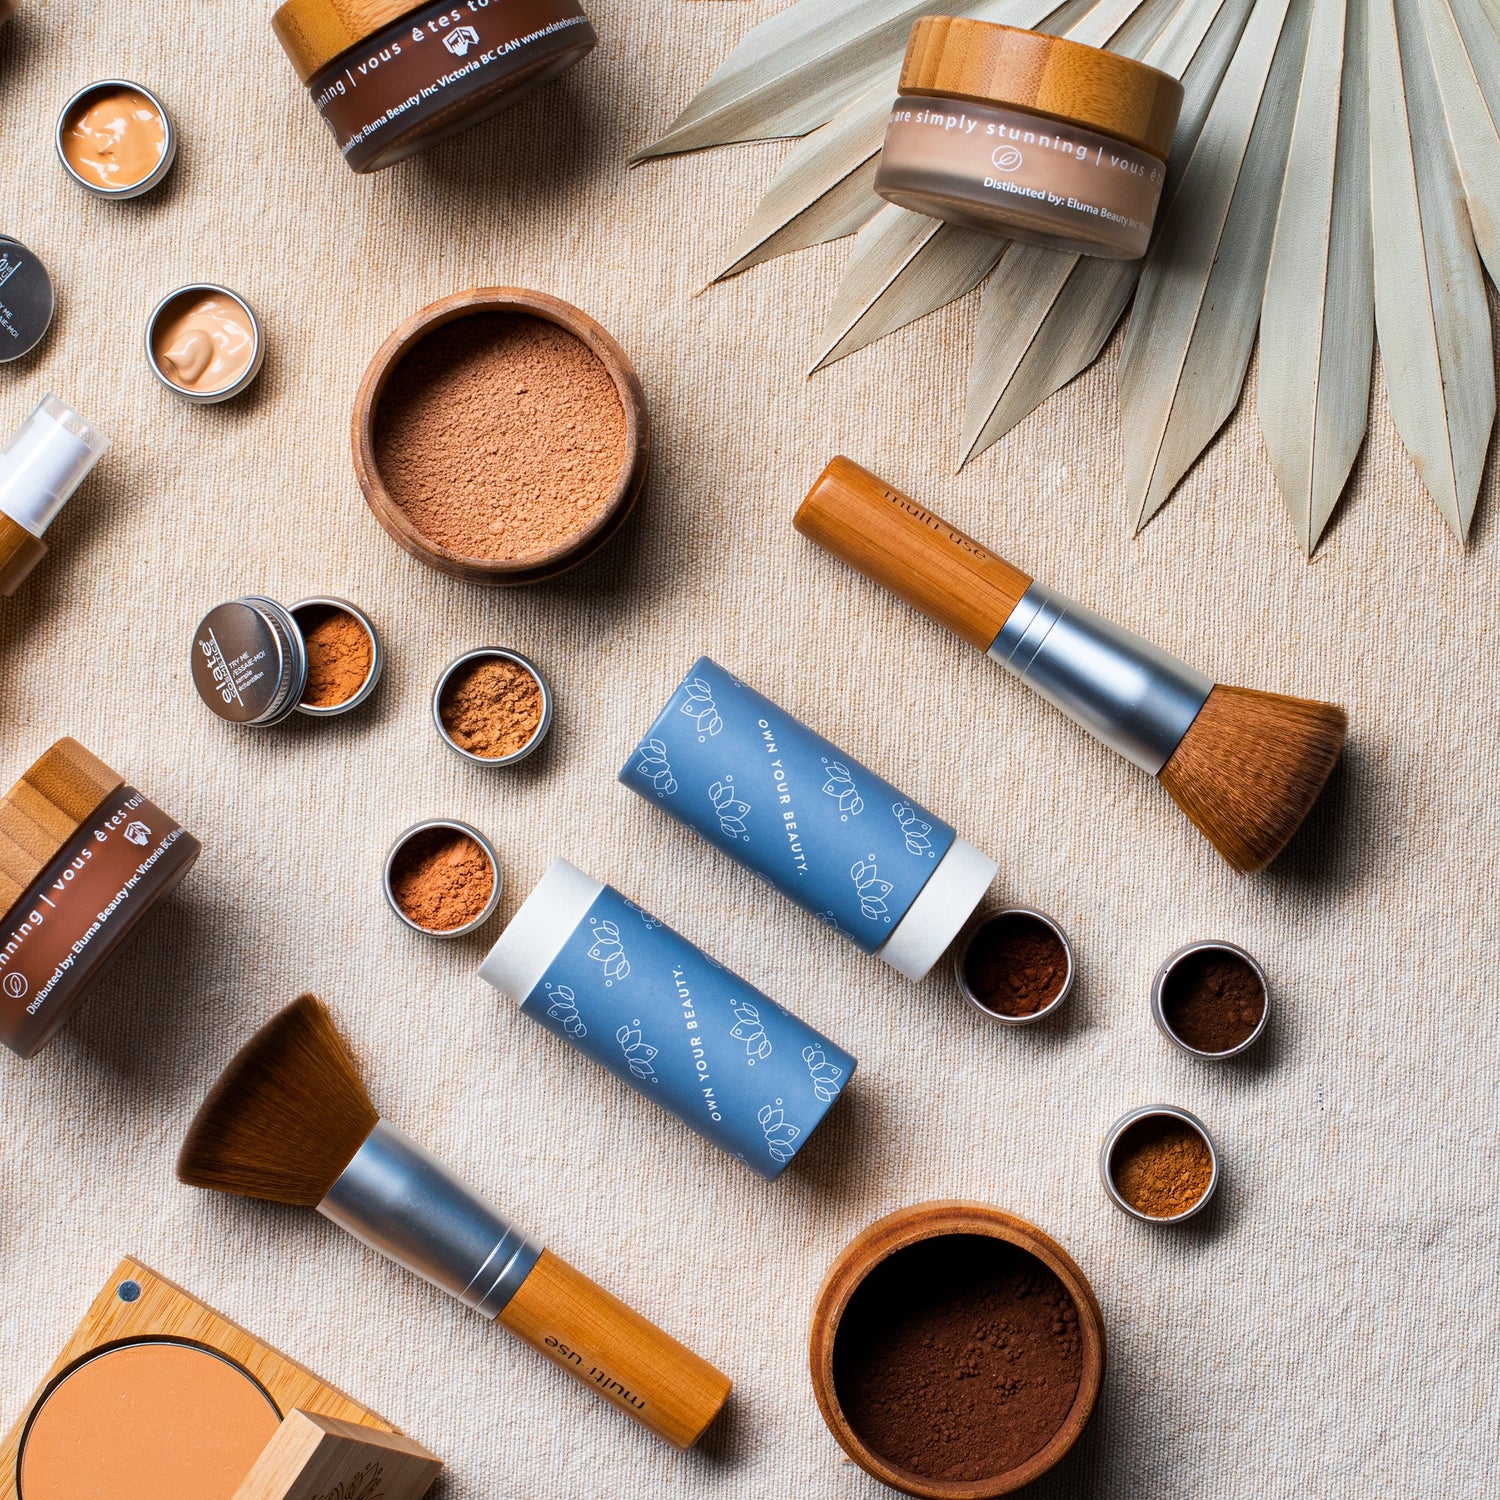 How to Find your Foundation Shade: Elate's Foundation Sample Kits